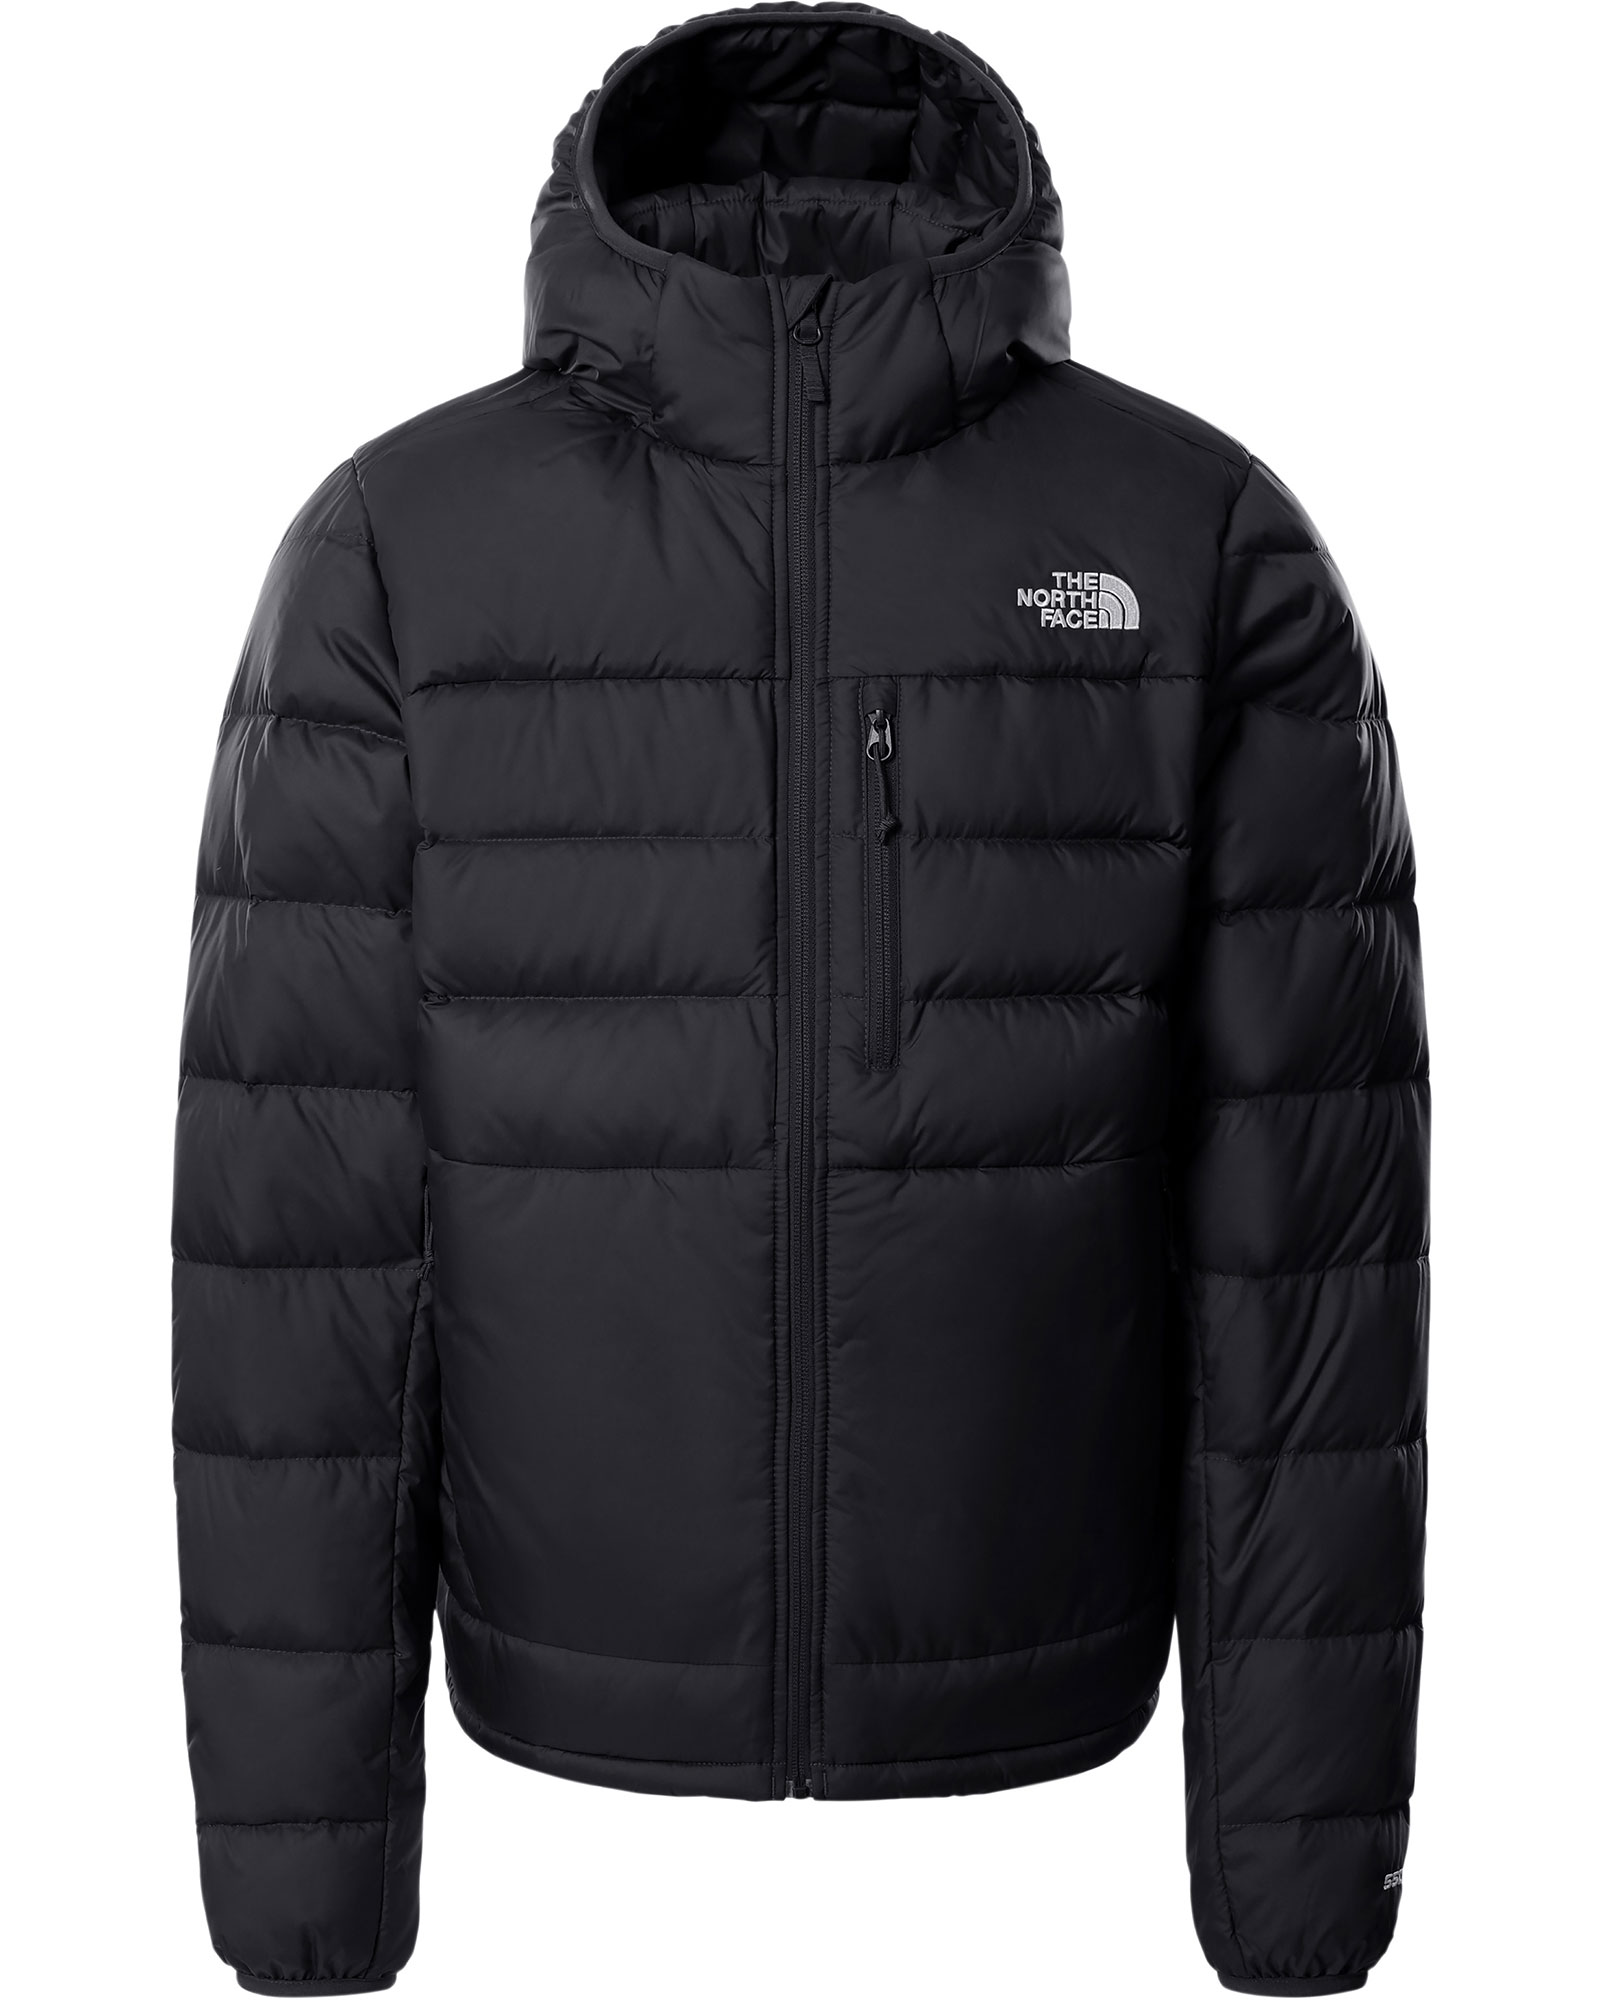 The North Face Aconcagua 2 Mens Hoodie